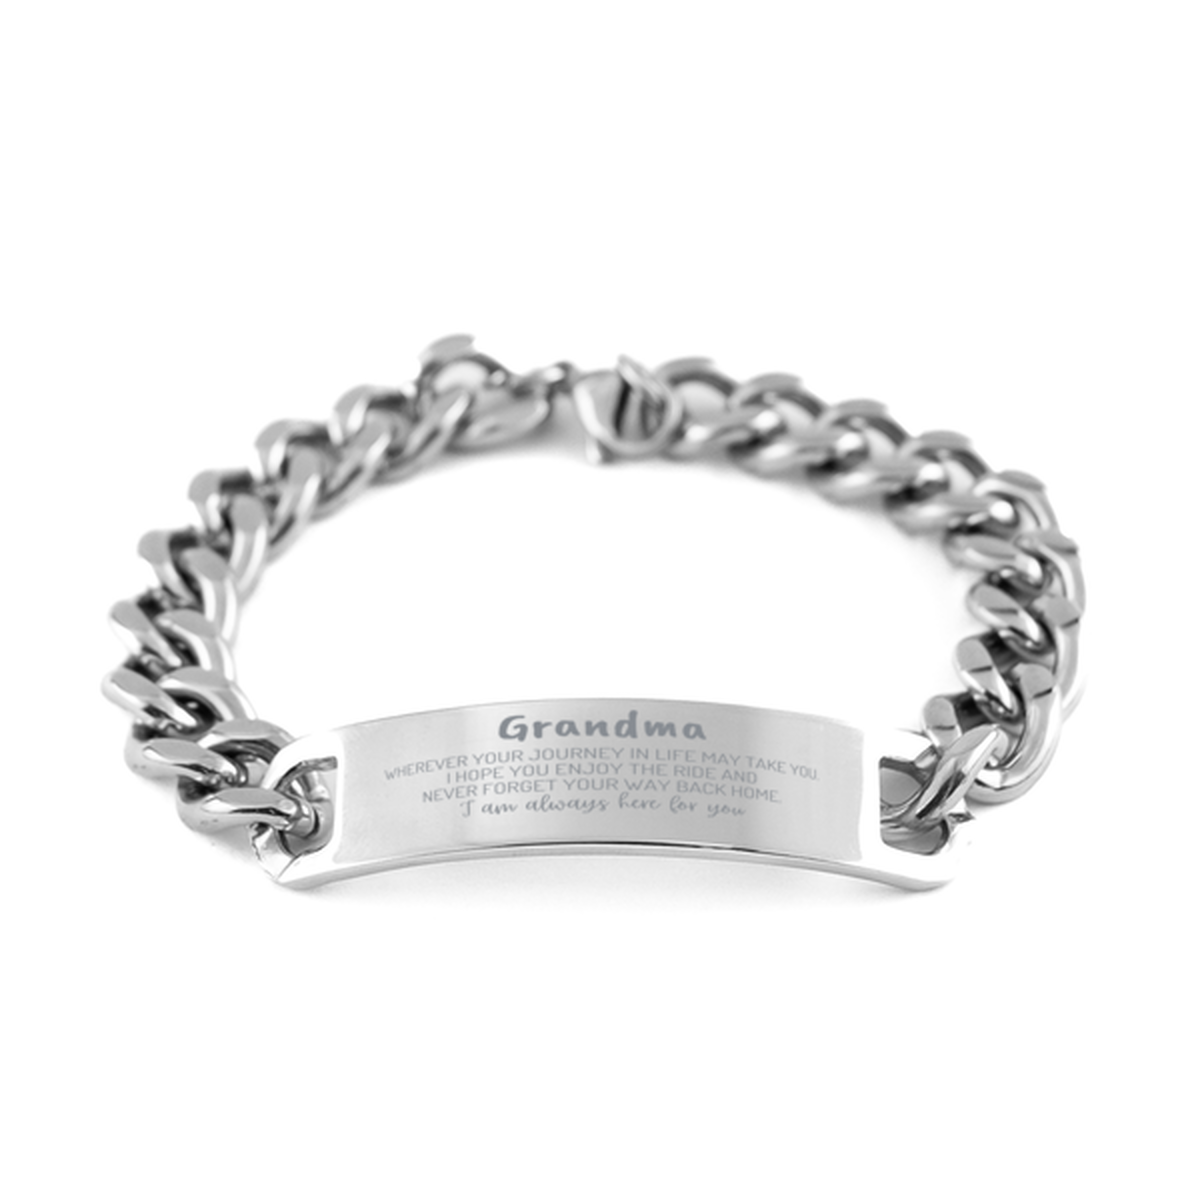 Grandma wherever your journey in life may take you, I am always here for you Grandma Cuban Chain Stainless Steel Bracelet, Awesome Christmas Gifts For Grandma, Grandma Birthday Gifts for Men Women Family Loved One